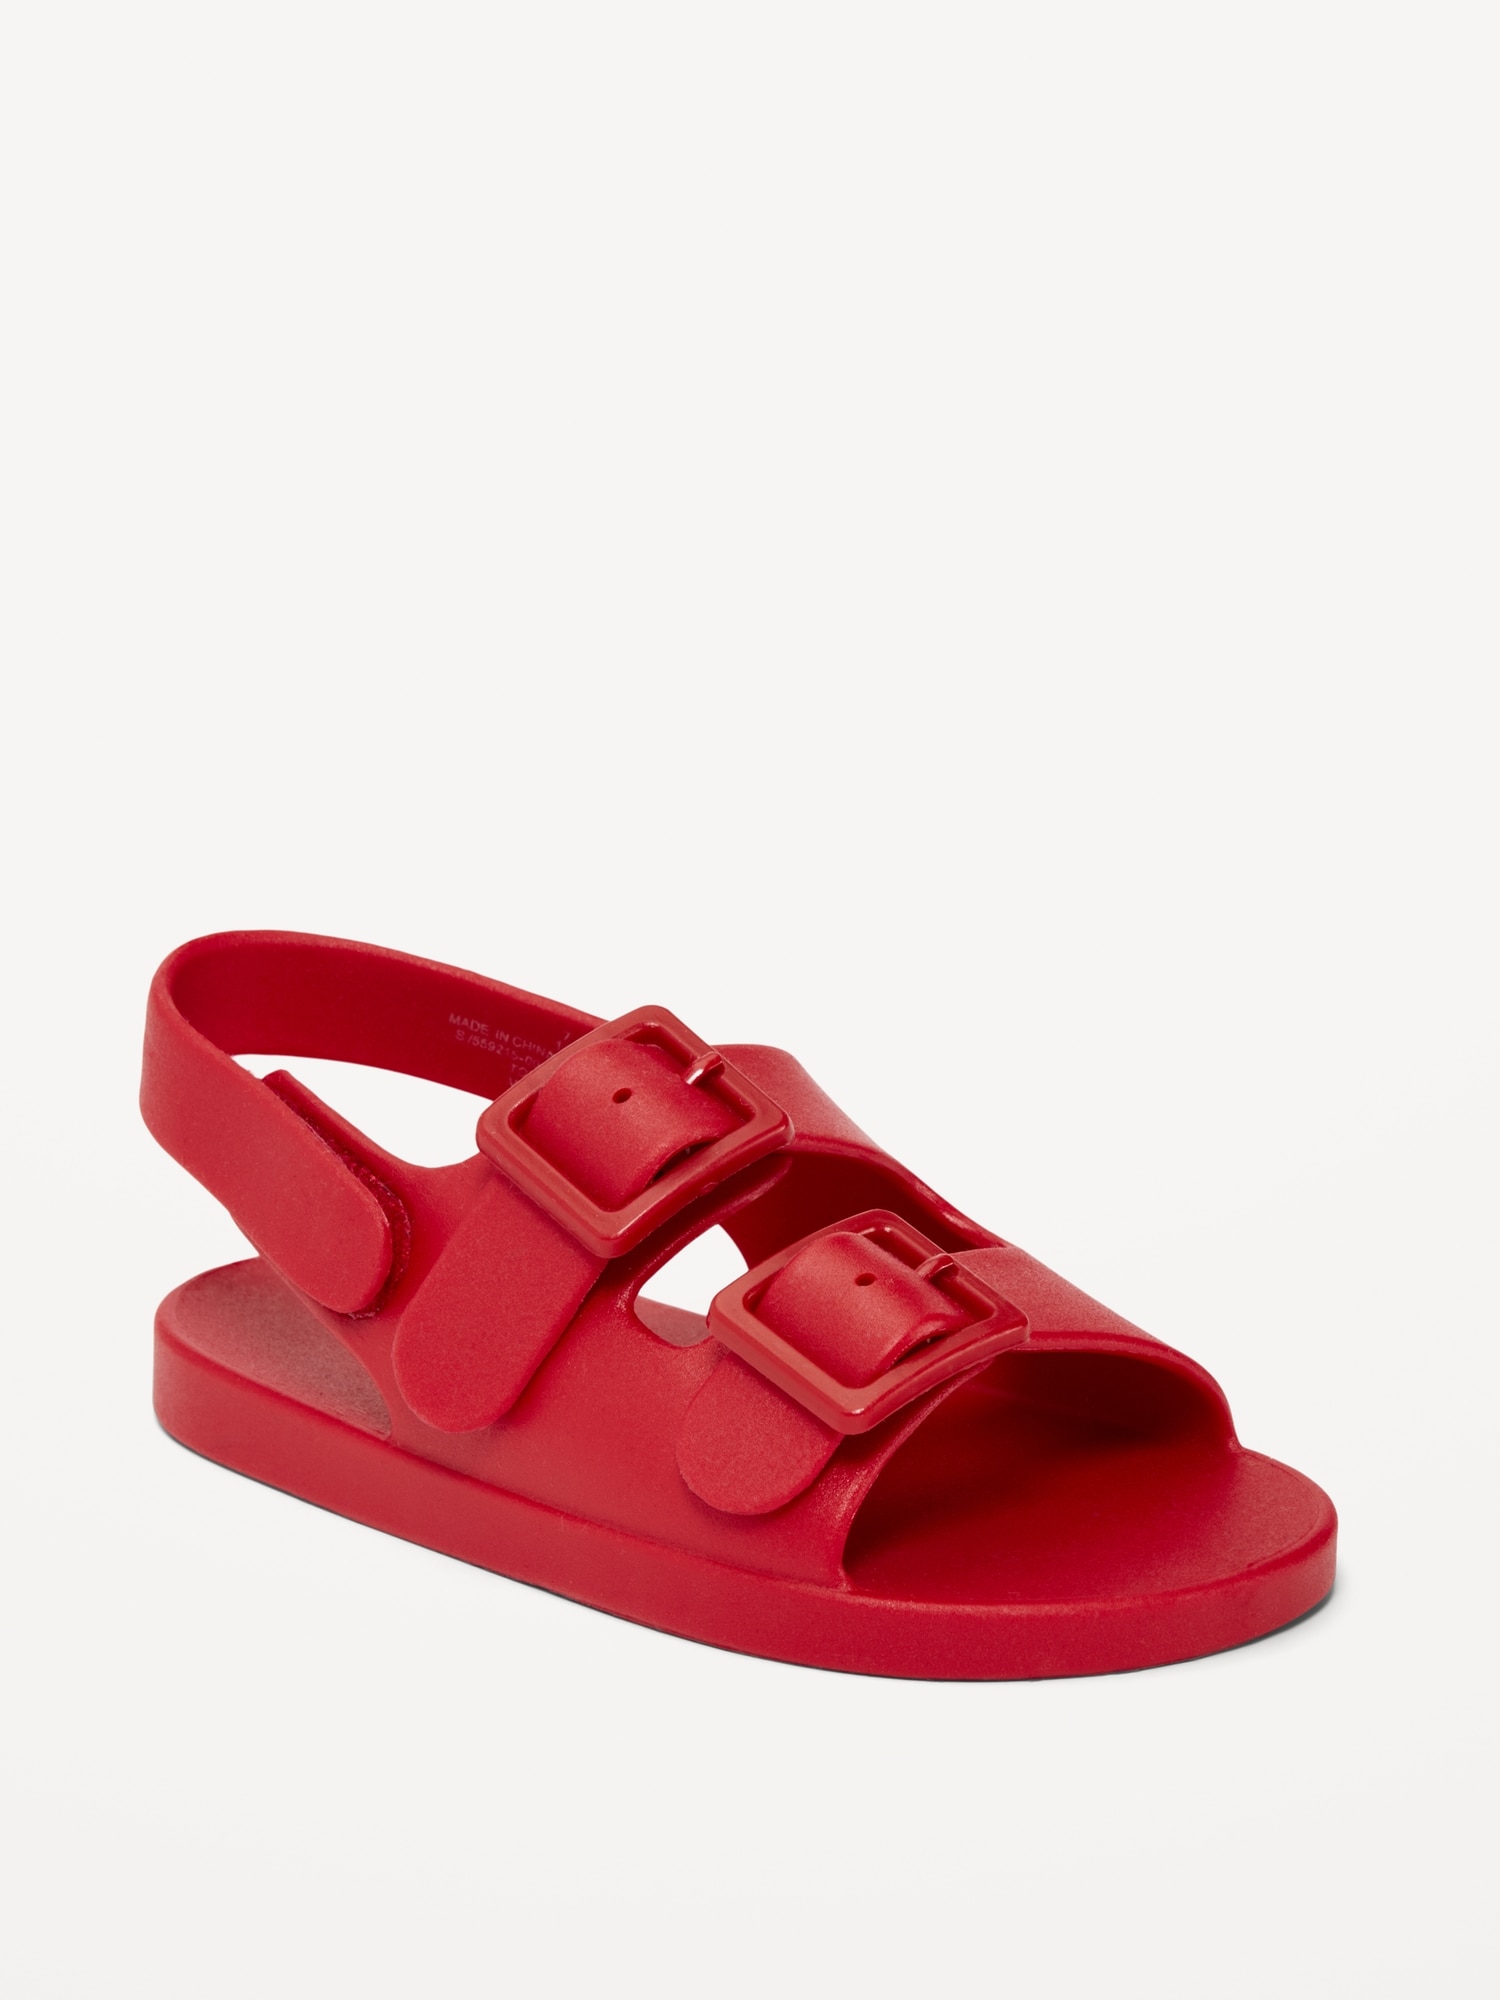 Oldnavy Unisex Jelly Double-Buckle Sandals for Toddler